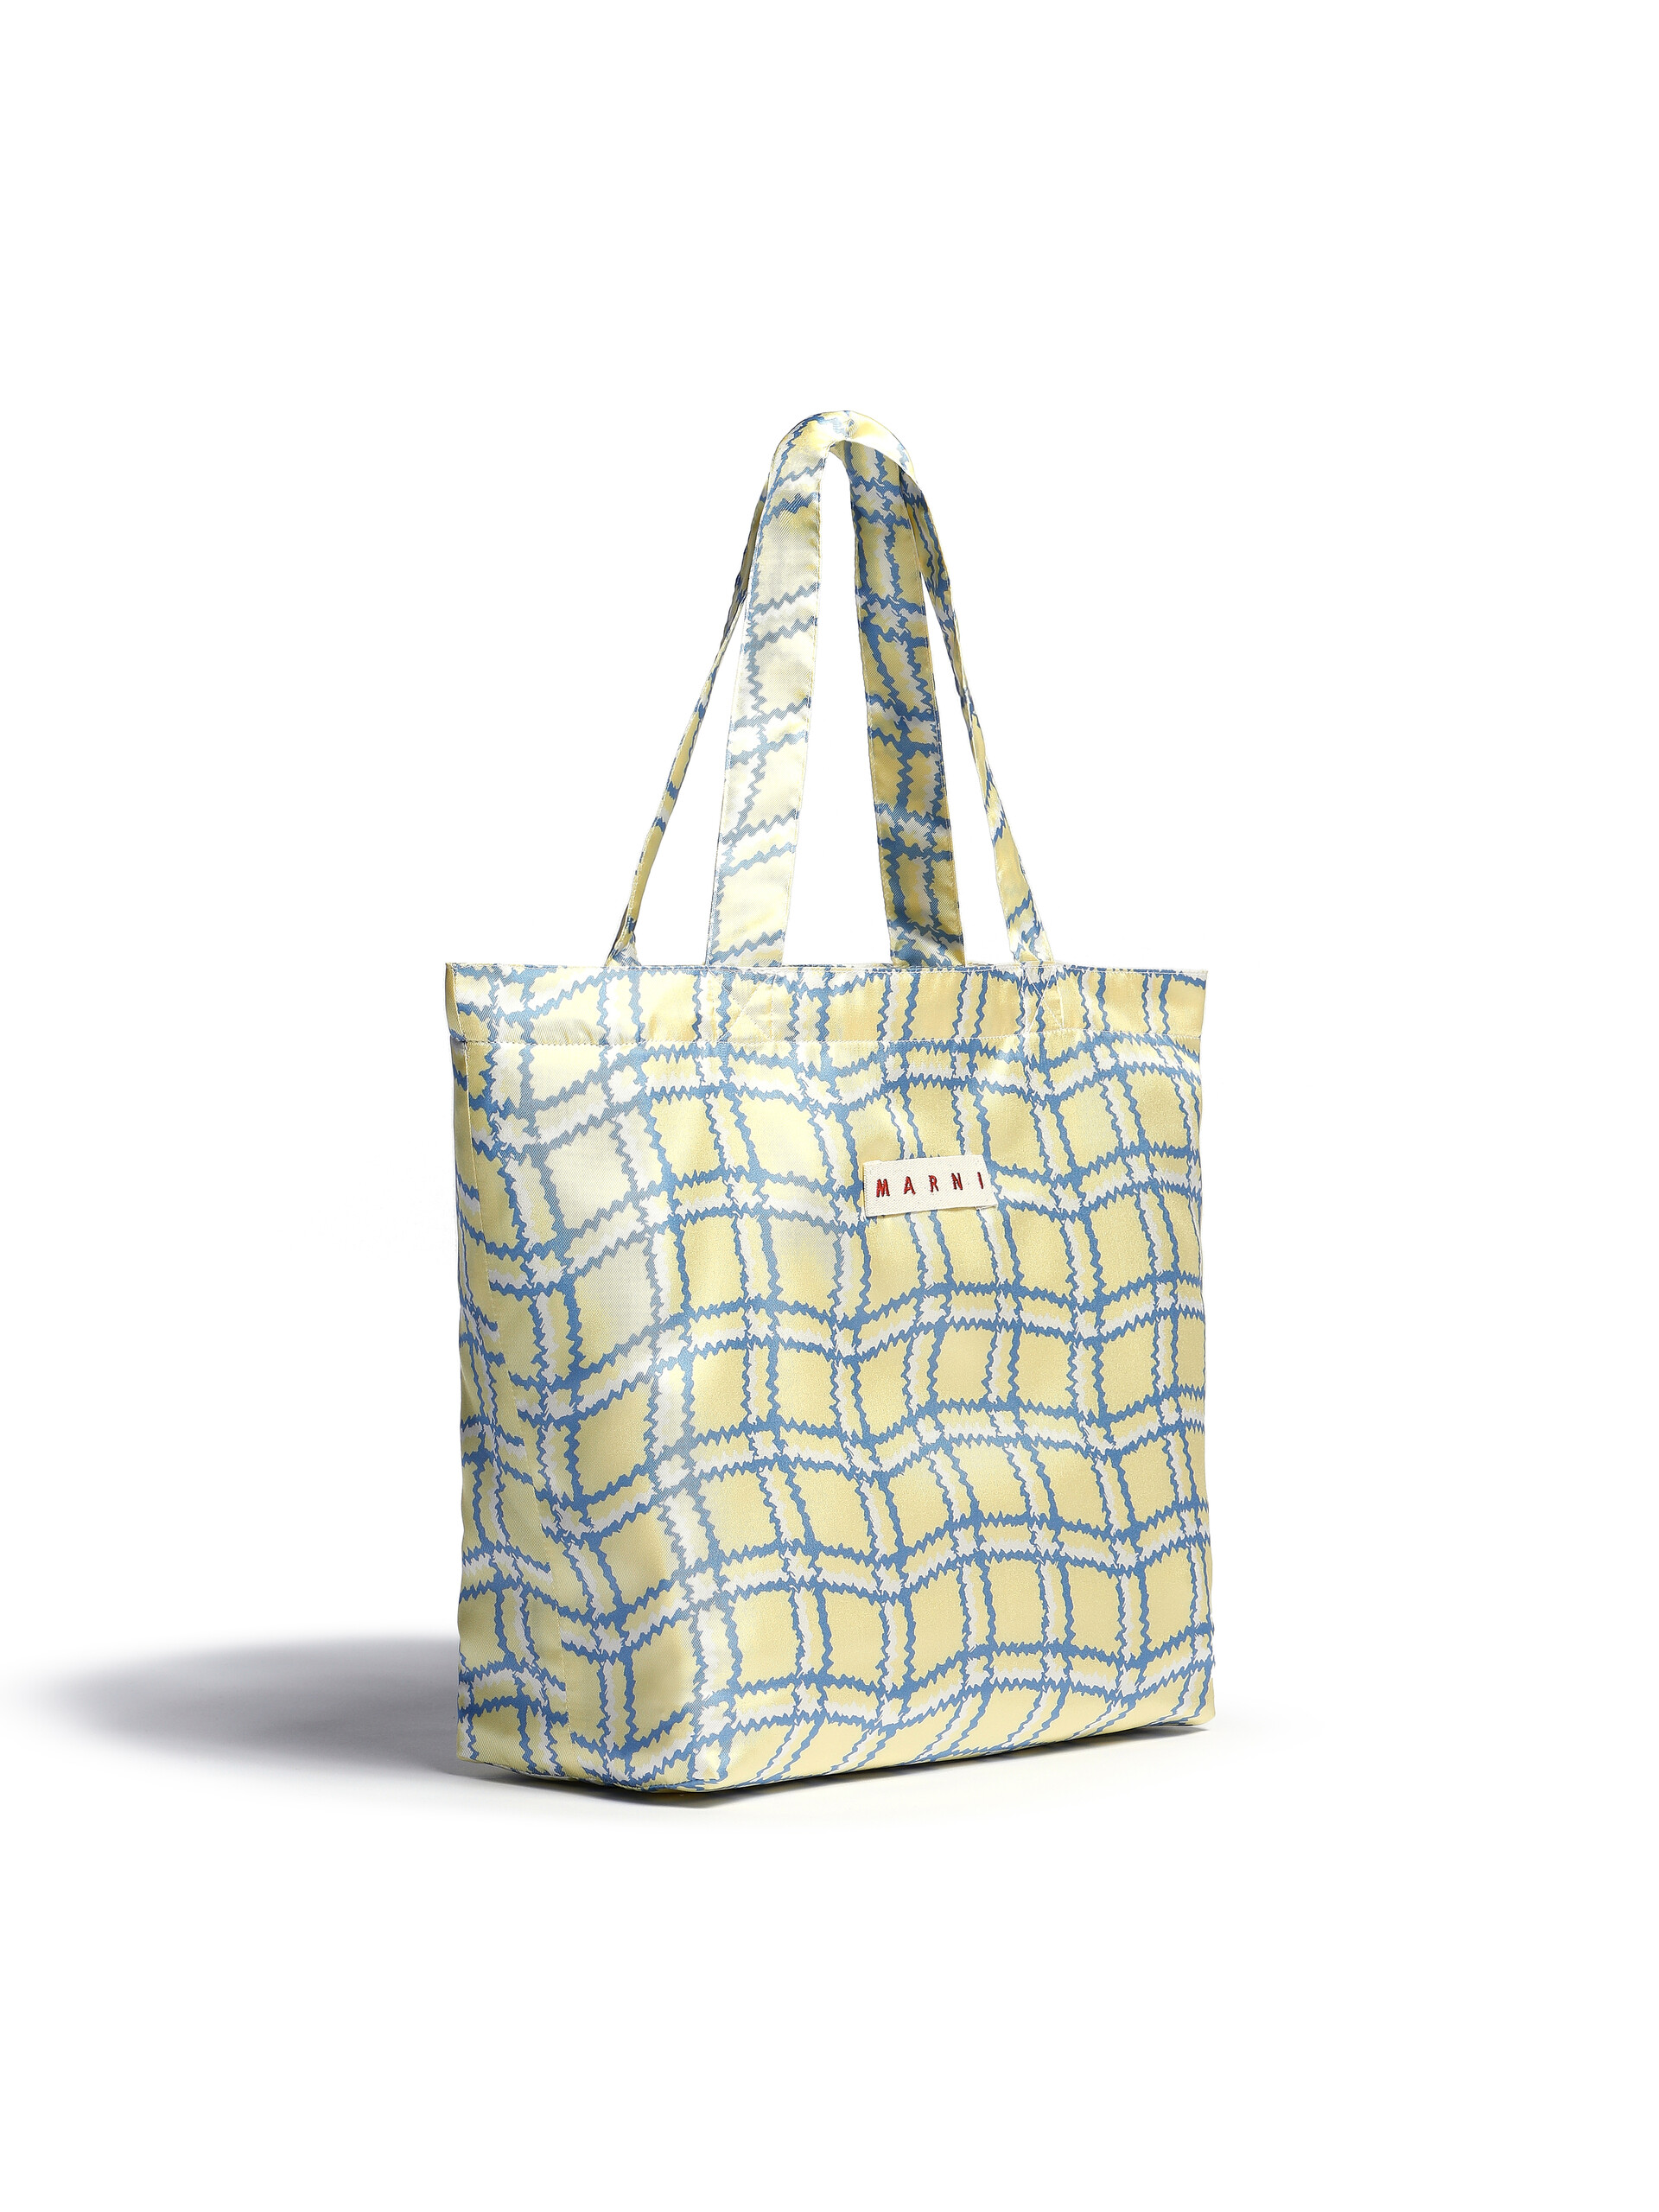 Yellow silk tote bag with archival check print - Bags - Image 2